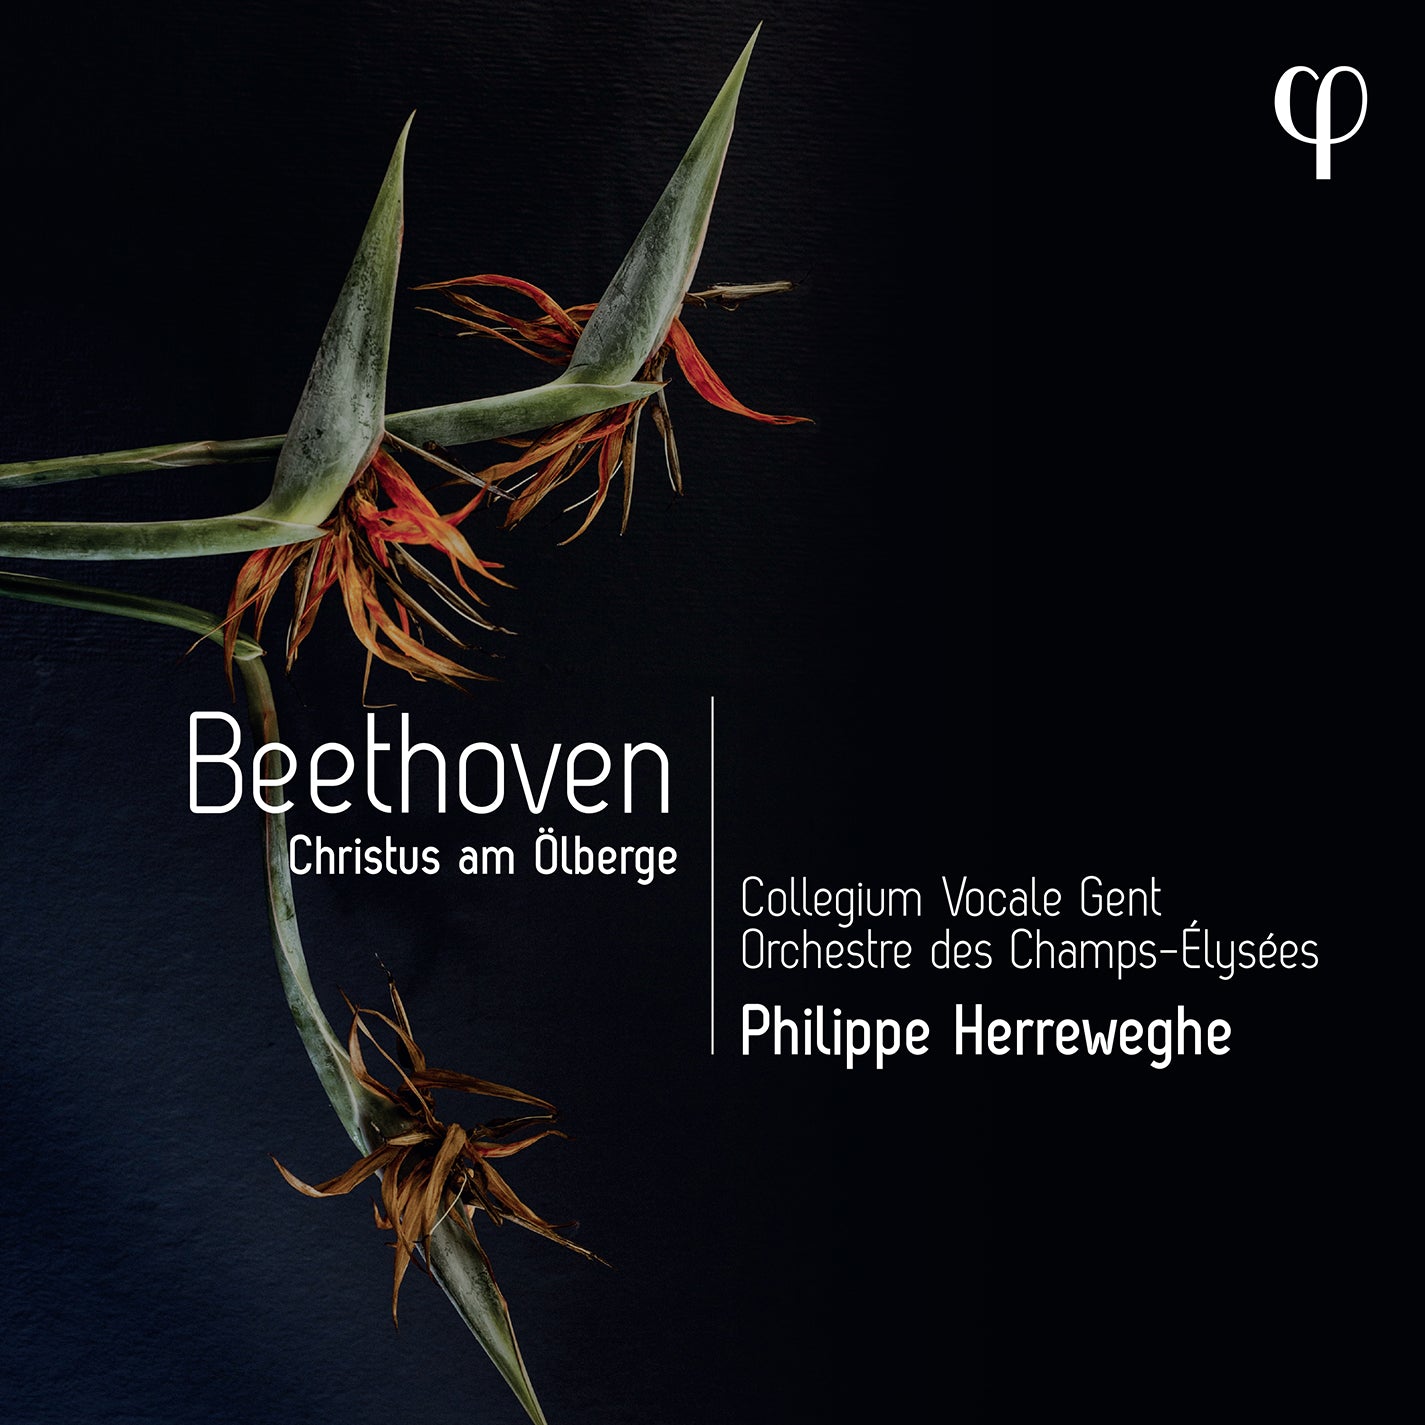 Beethoven: Christ on the Mount / Herreweghe, Orchestra of the Champs-Élysées